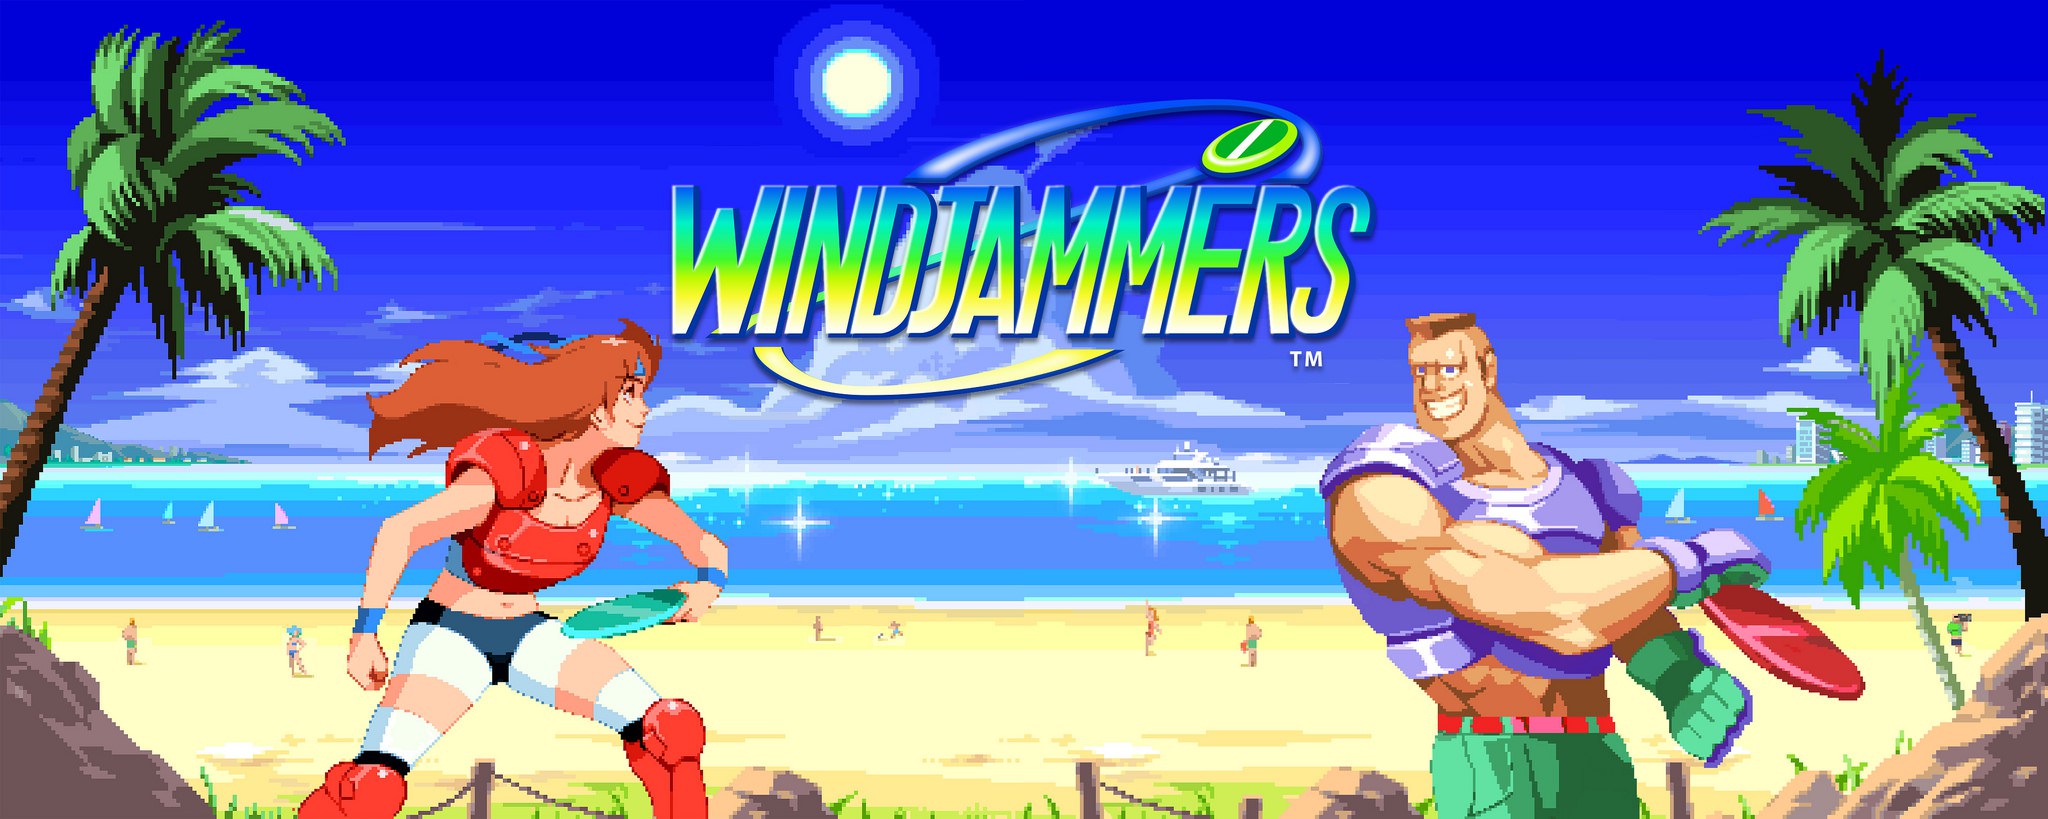 A new patch for Windjammers on PS4!